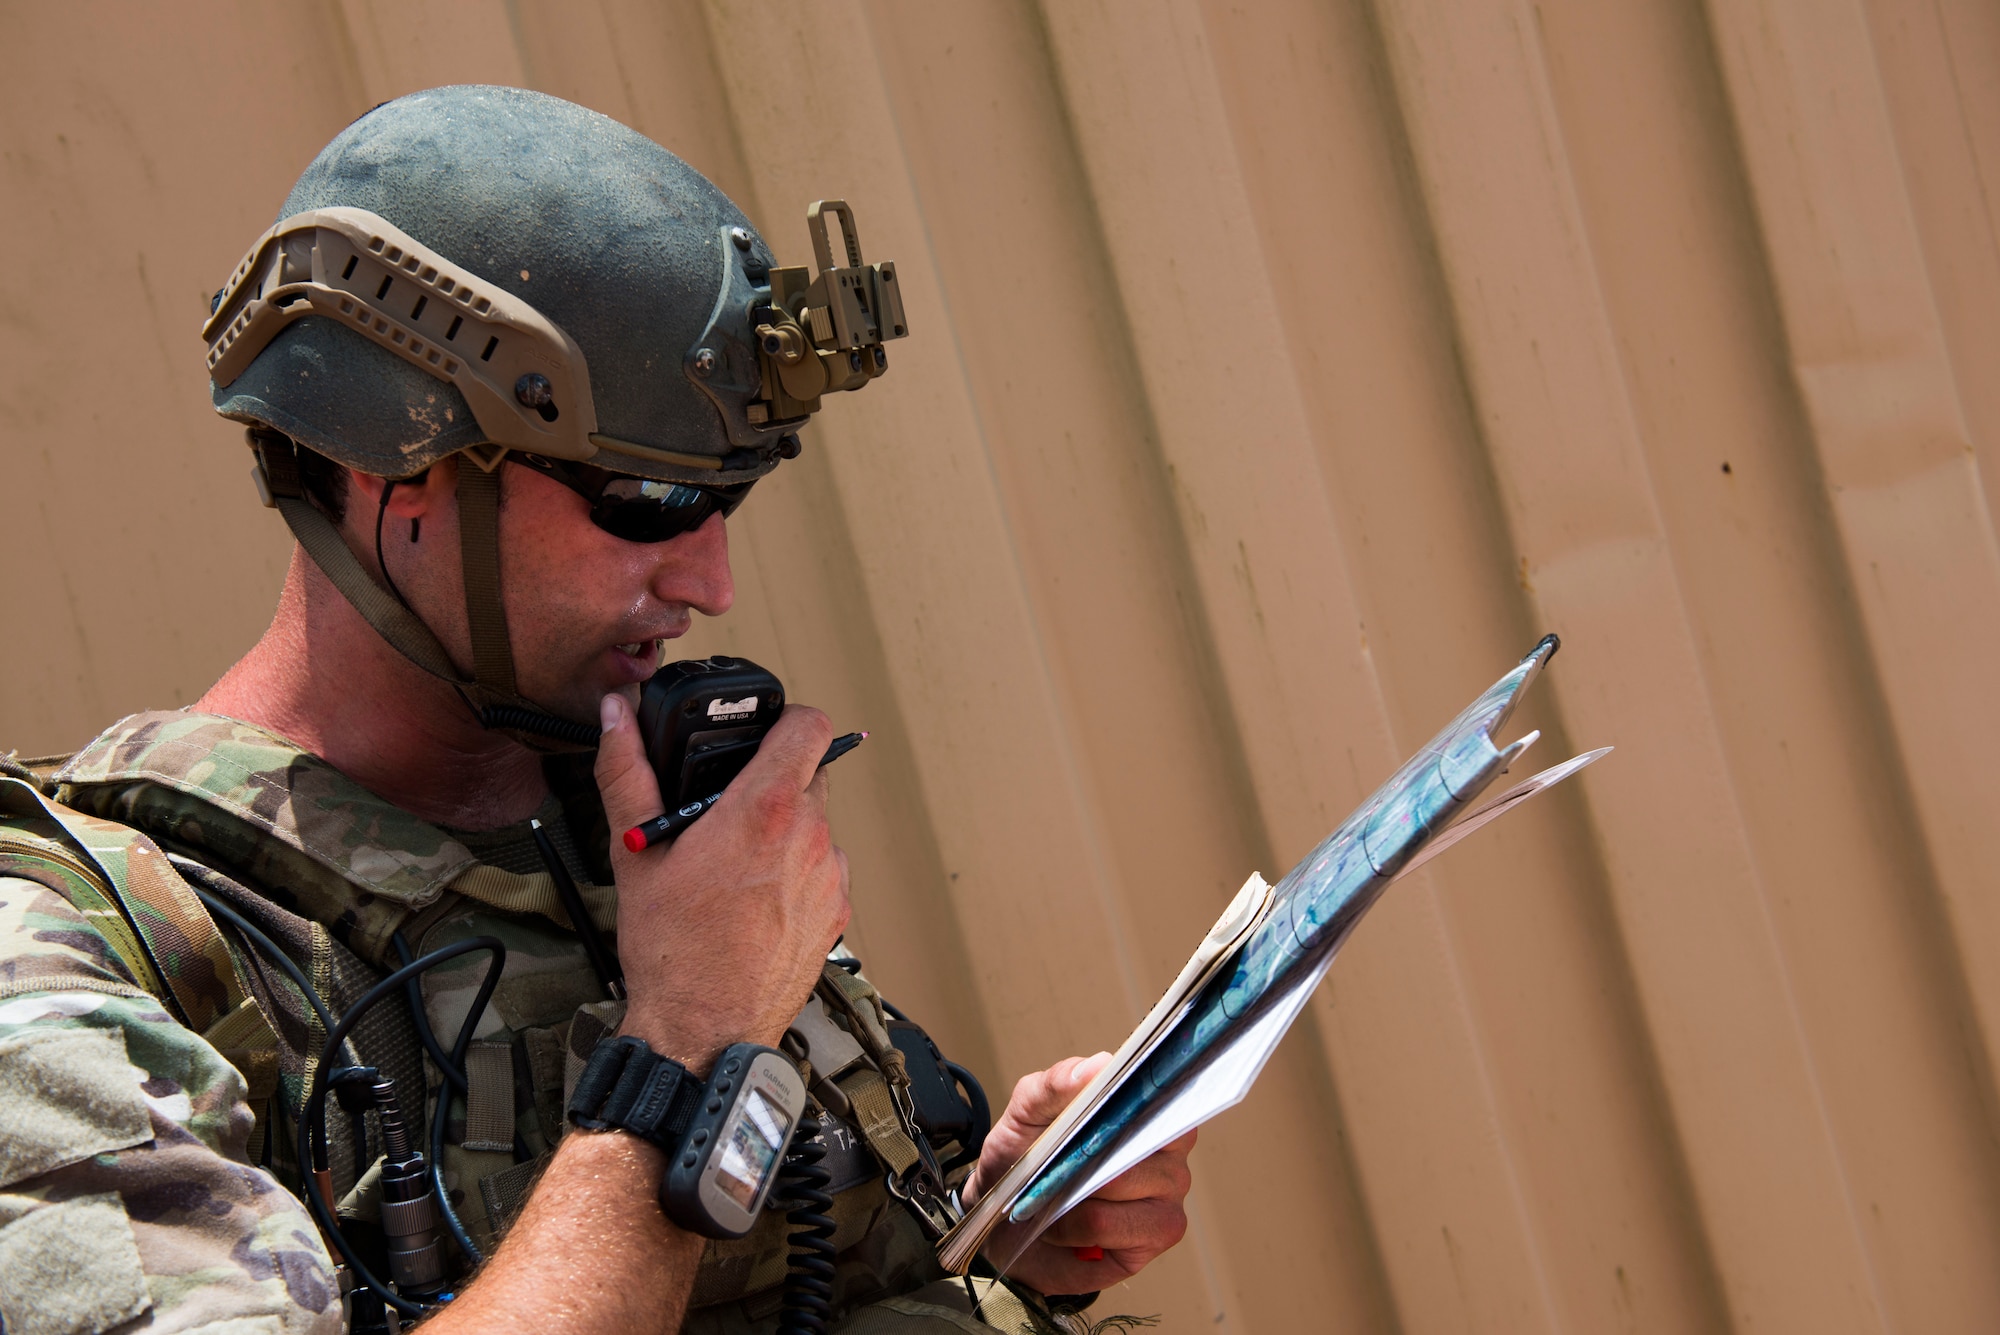 U.S. Air Force Staff Sgt. Robert Cooch, 18th Air Support Operations Group joint terminal attack controller (JTAC), delivers attack coordinates to B-52 Bomber pilots during Exercise DRAGON STRIKE June 9, 2015, at Avon Park Air Force Range, Fla. The B-52 and 75th Fighter Squadron’s A-10C Thunderbolt IIs coordinated with the JTACs to deliver close air support for the JTACs. (U.S. Air Force photo by Airman 1st Class Dillian Bamman/Released)